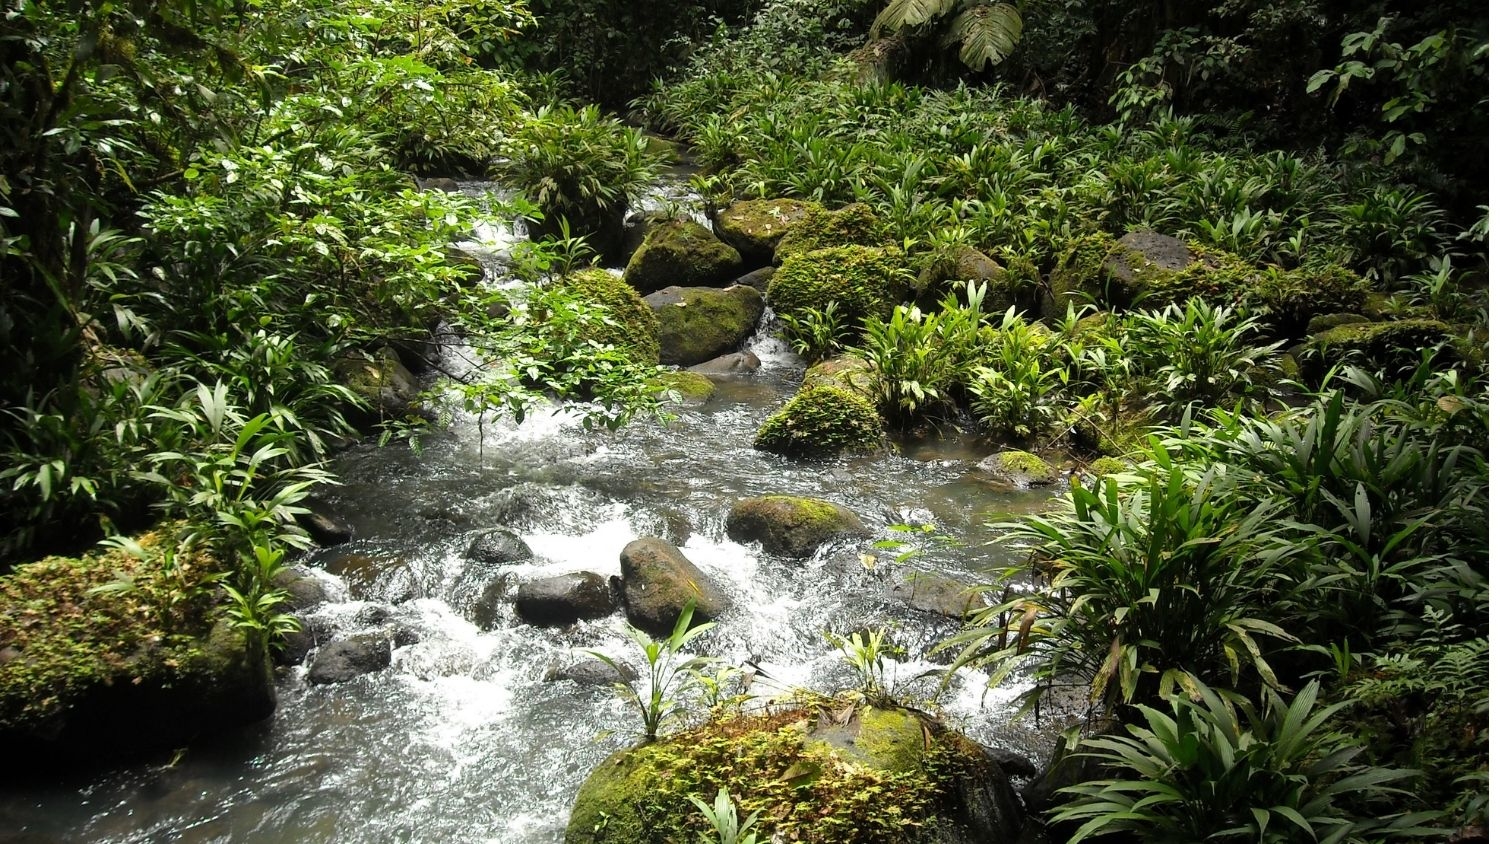 Stream in Costa Rica - Fertilizer Runoff in Streams and Rivers Can Have Cascading Effects, Analysis Shows - College of Natural Resources News NC State University